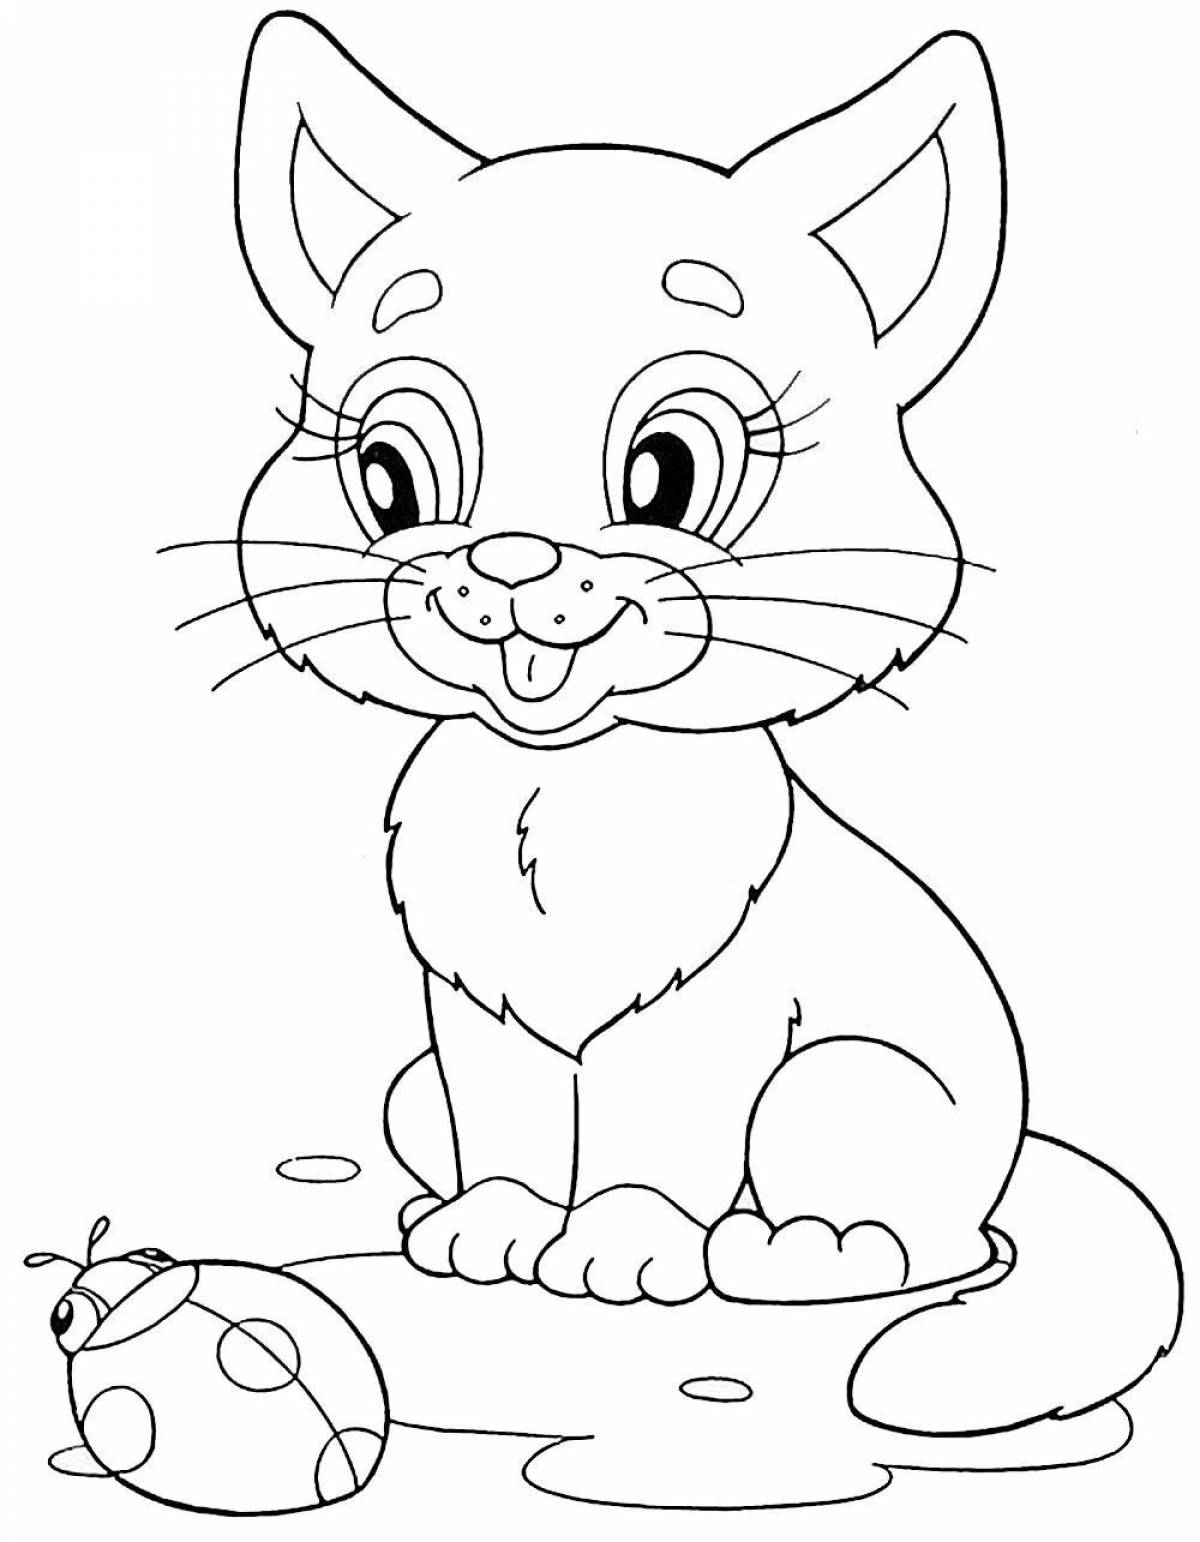 Interesting cat coloring book for children 5-6 years old